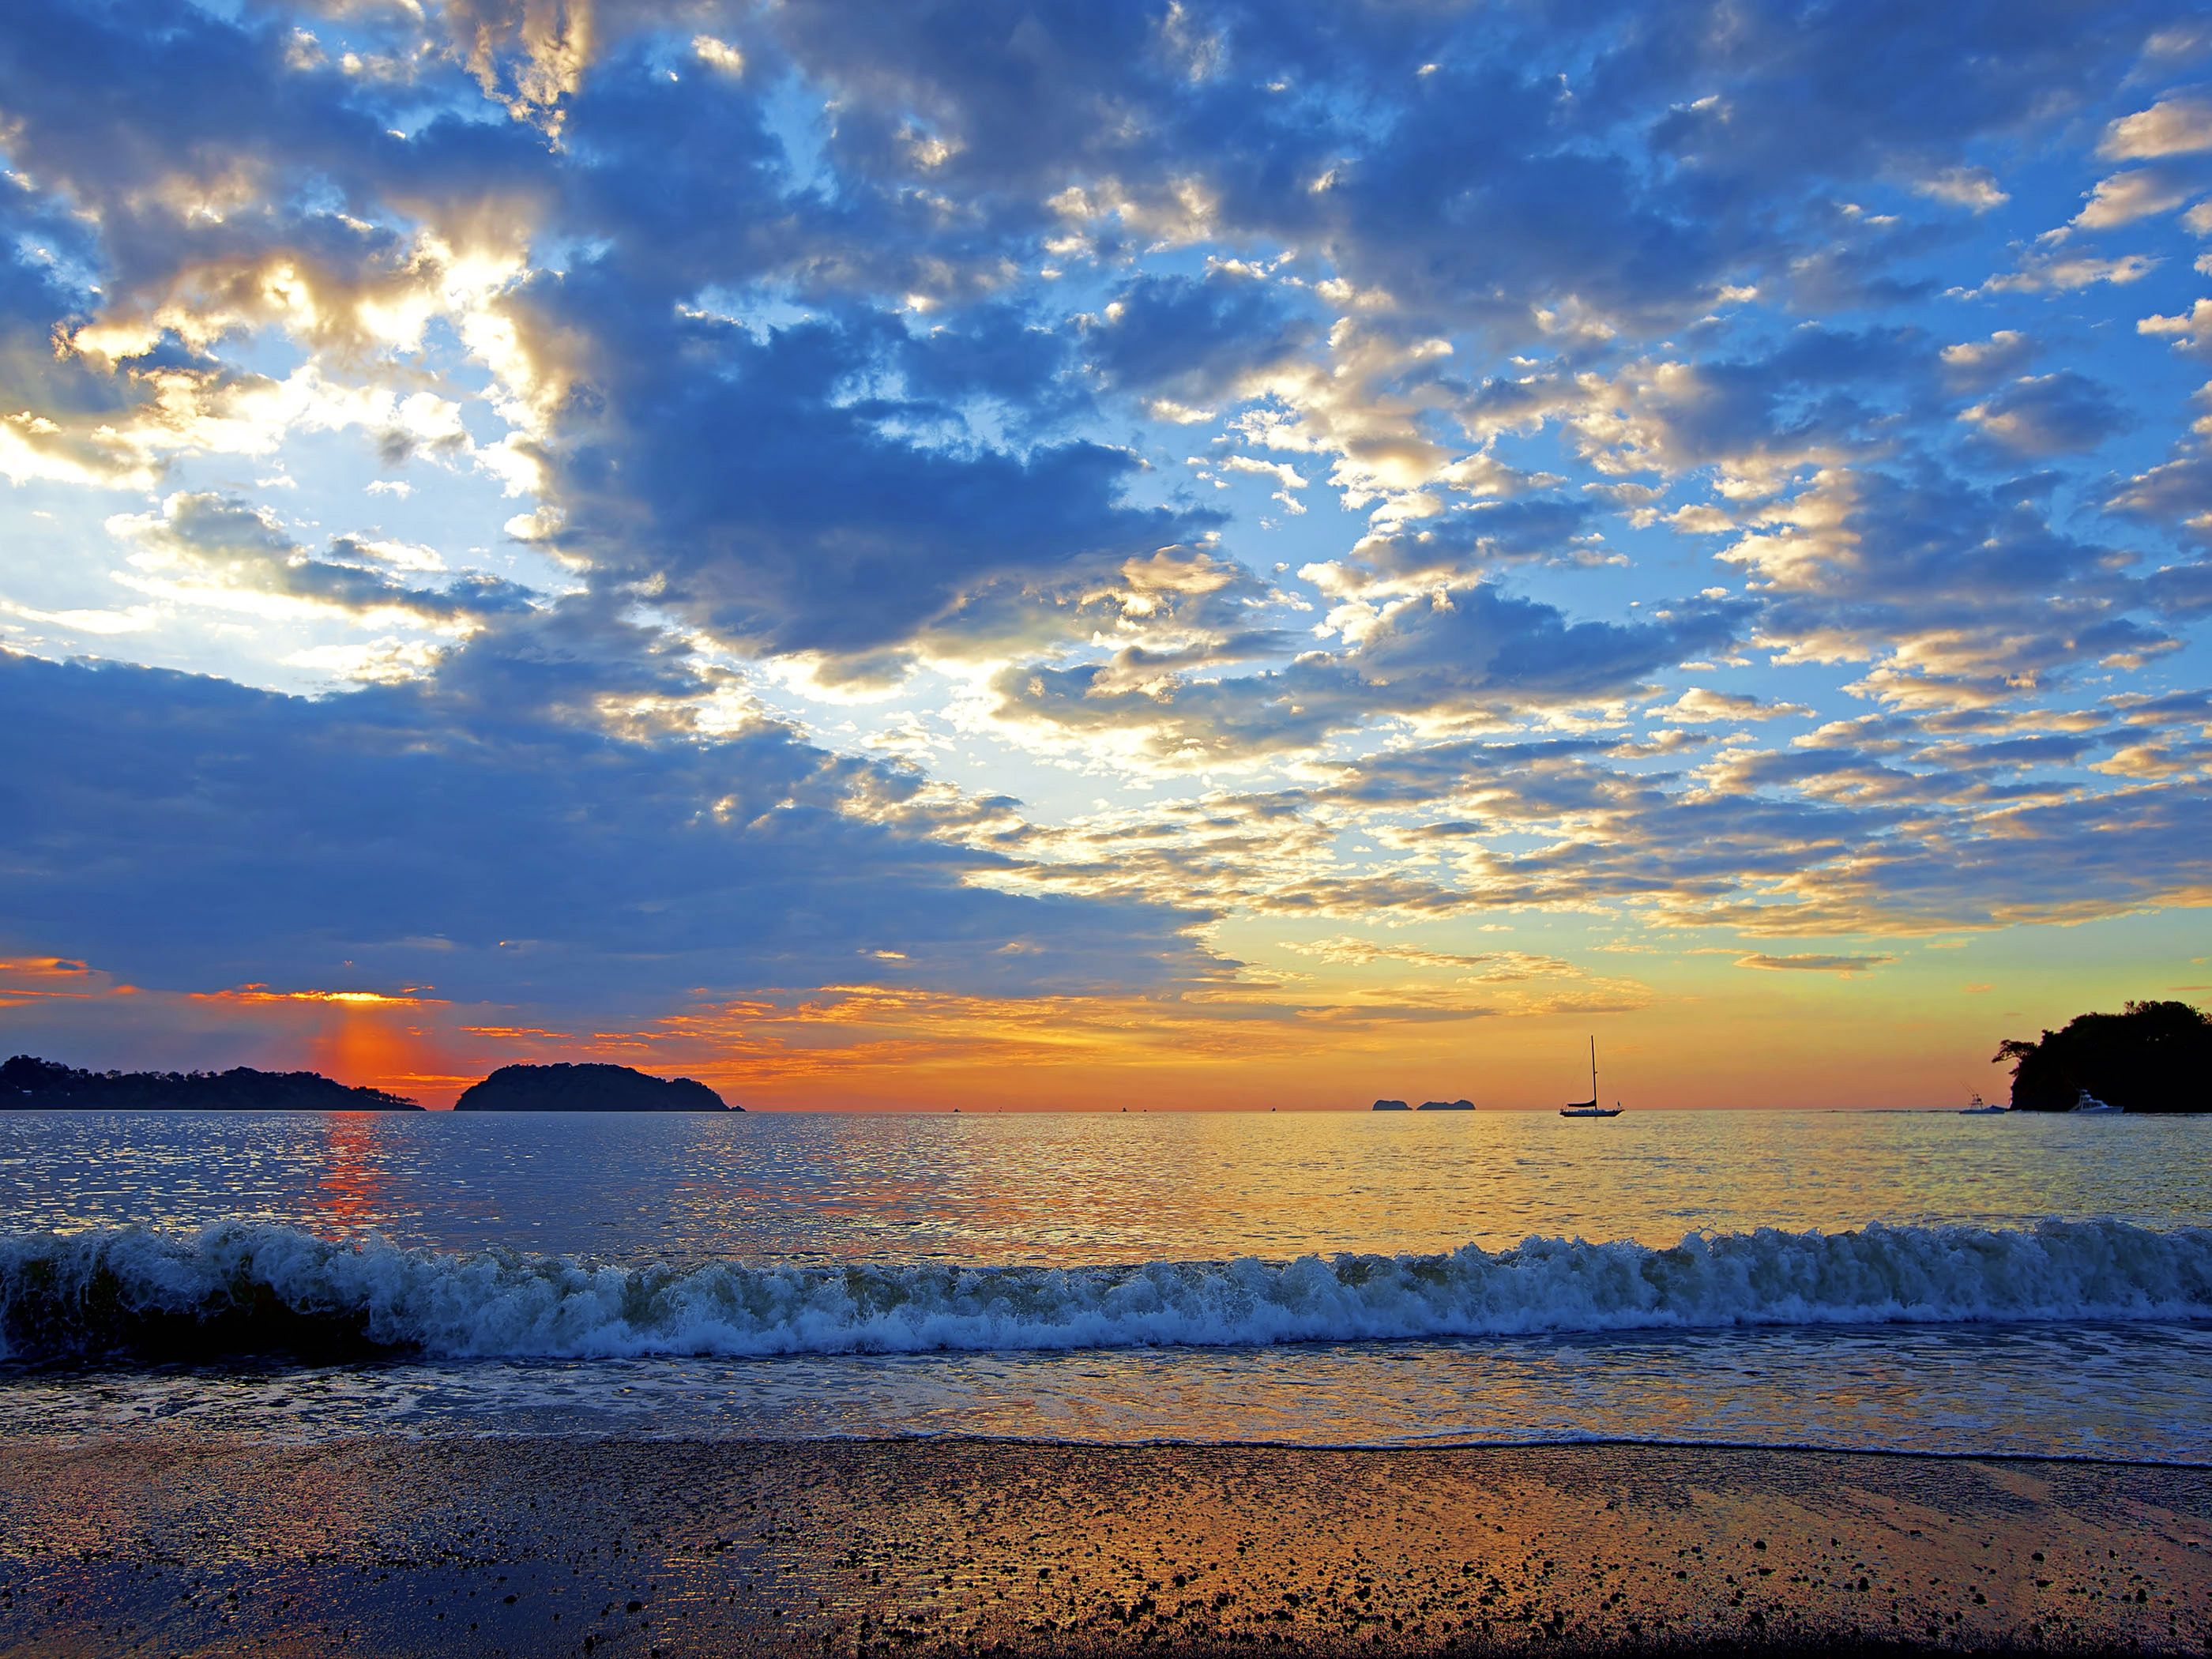 Wallpaper Of Colorful Sunset In The Guancaste Costa Rica